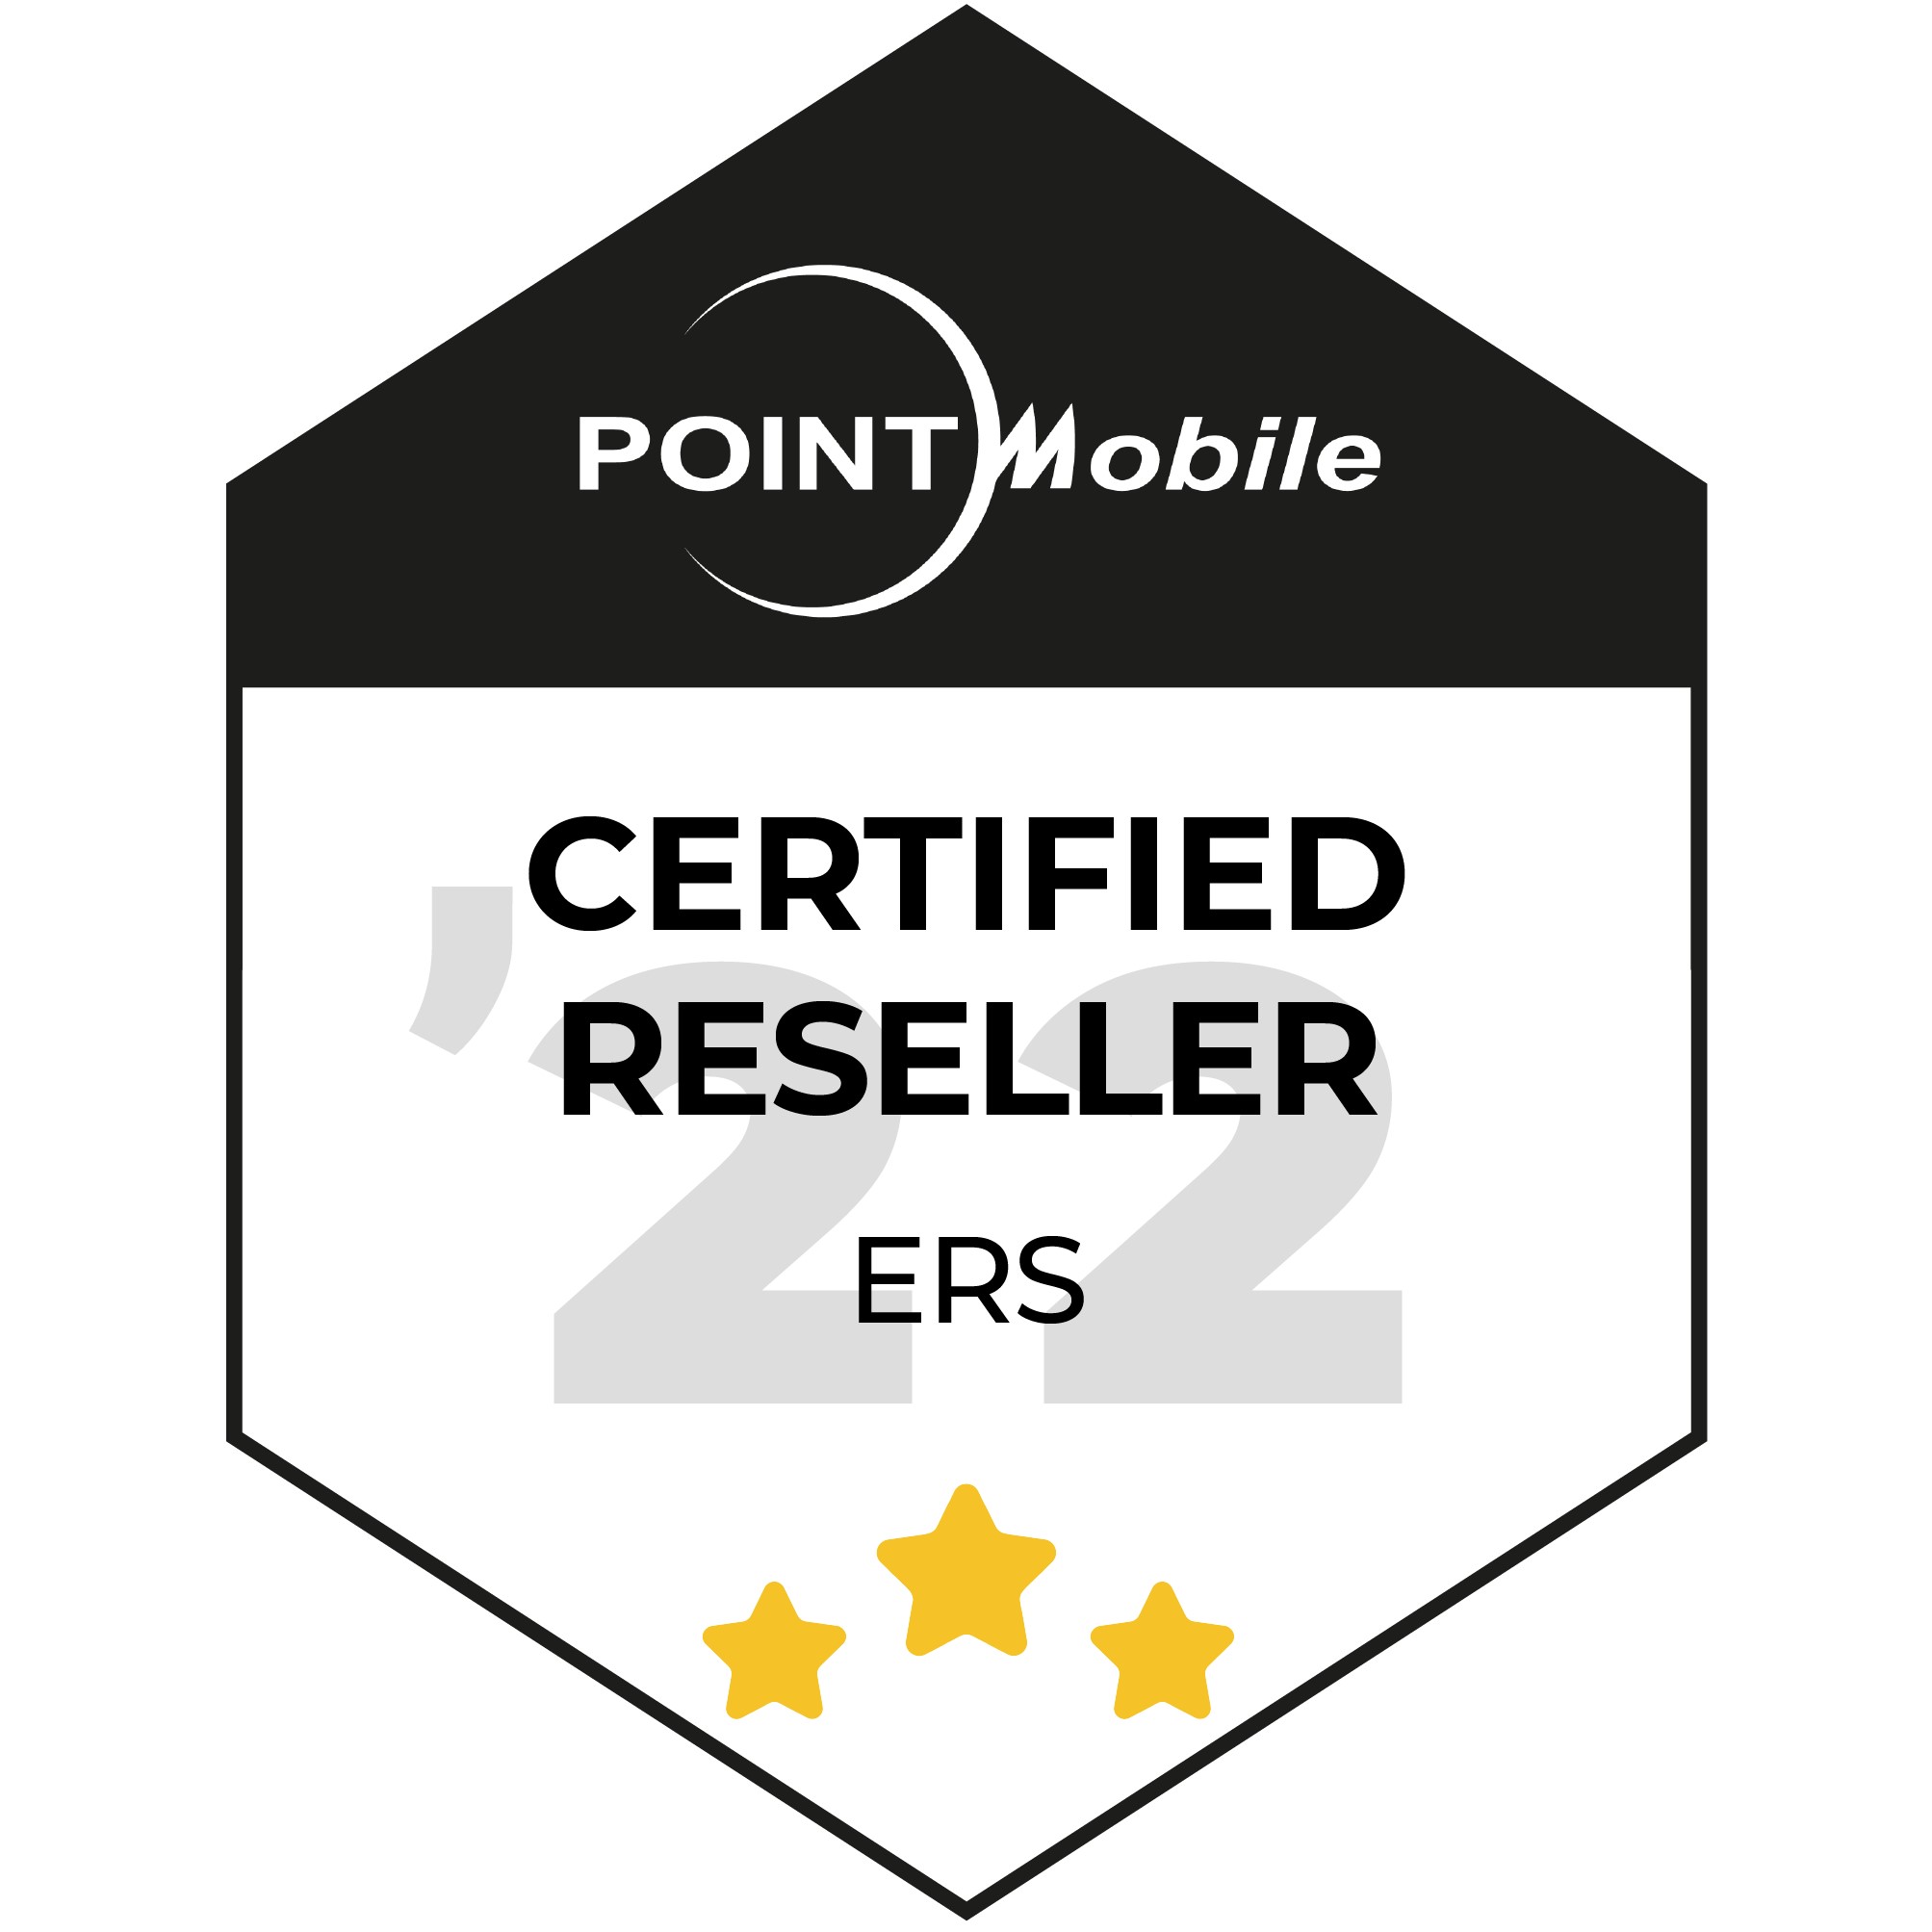 Image of Point Mobile Reseller Certificate Badge